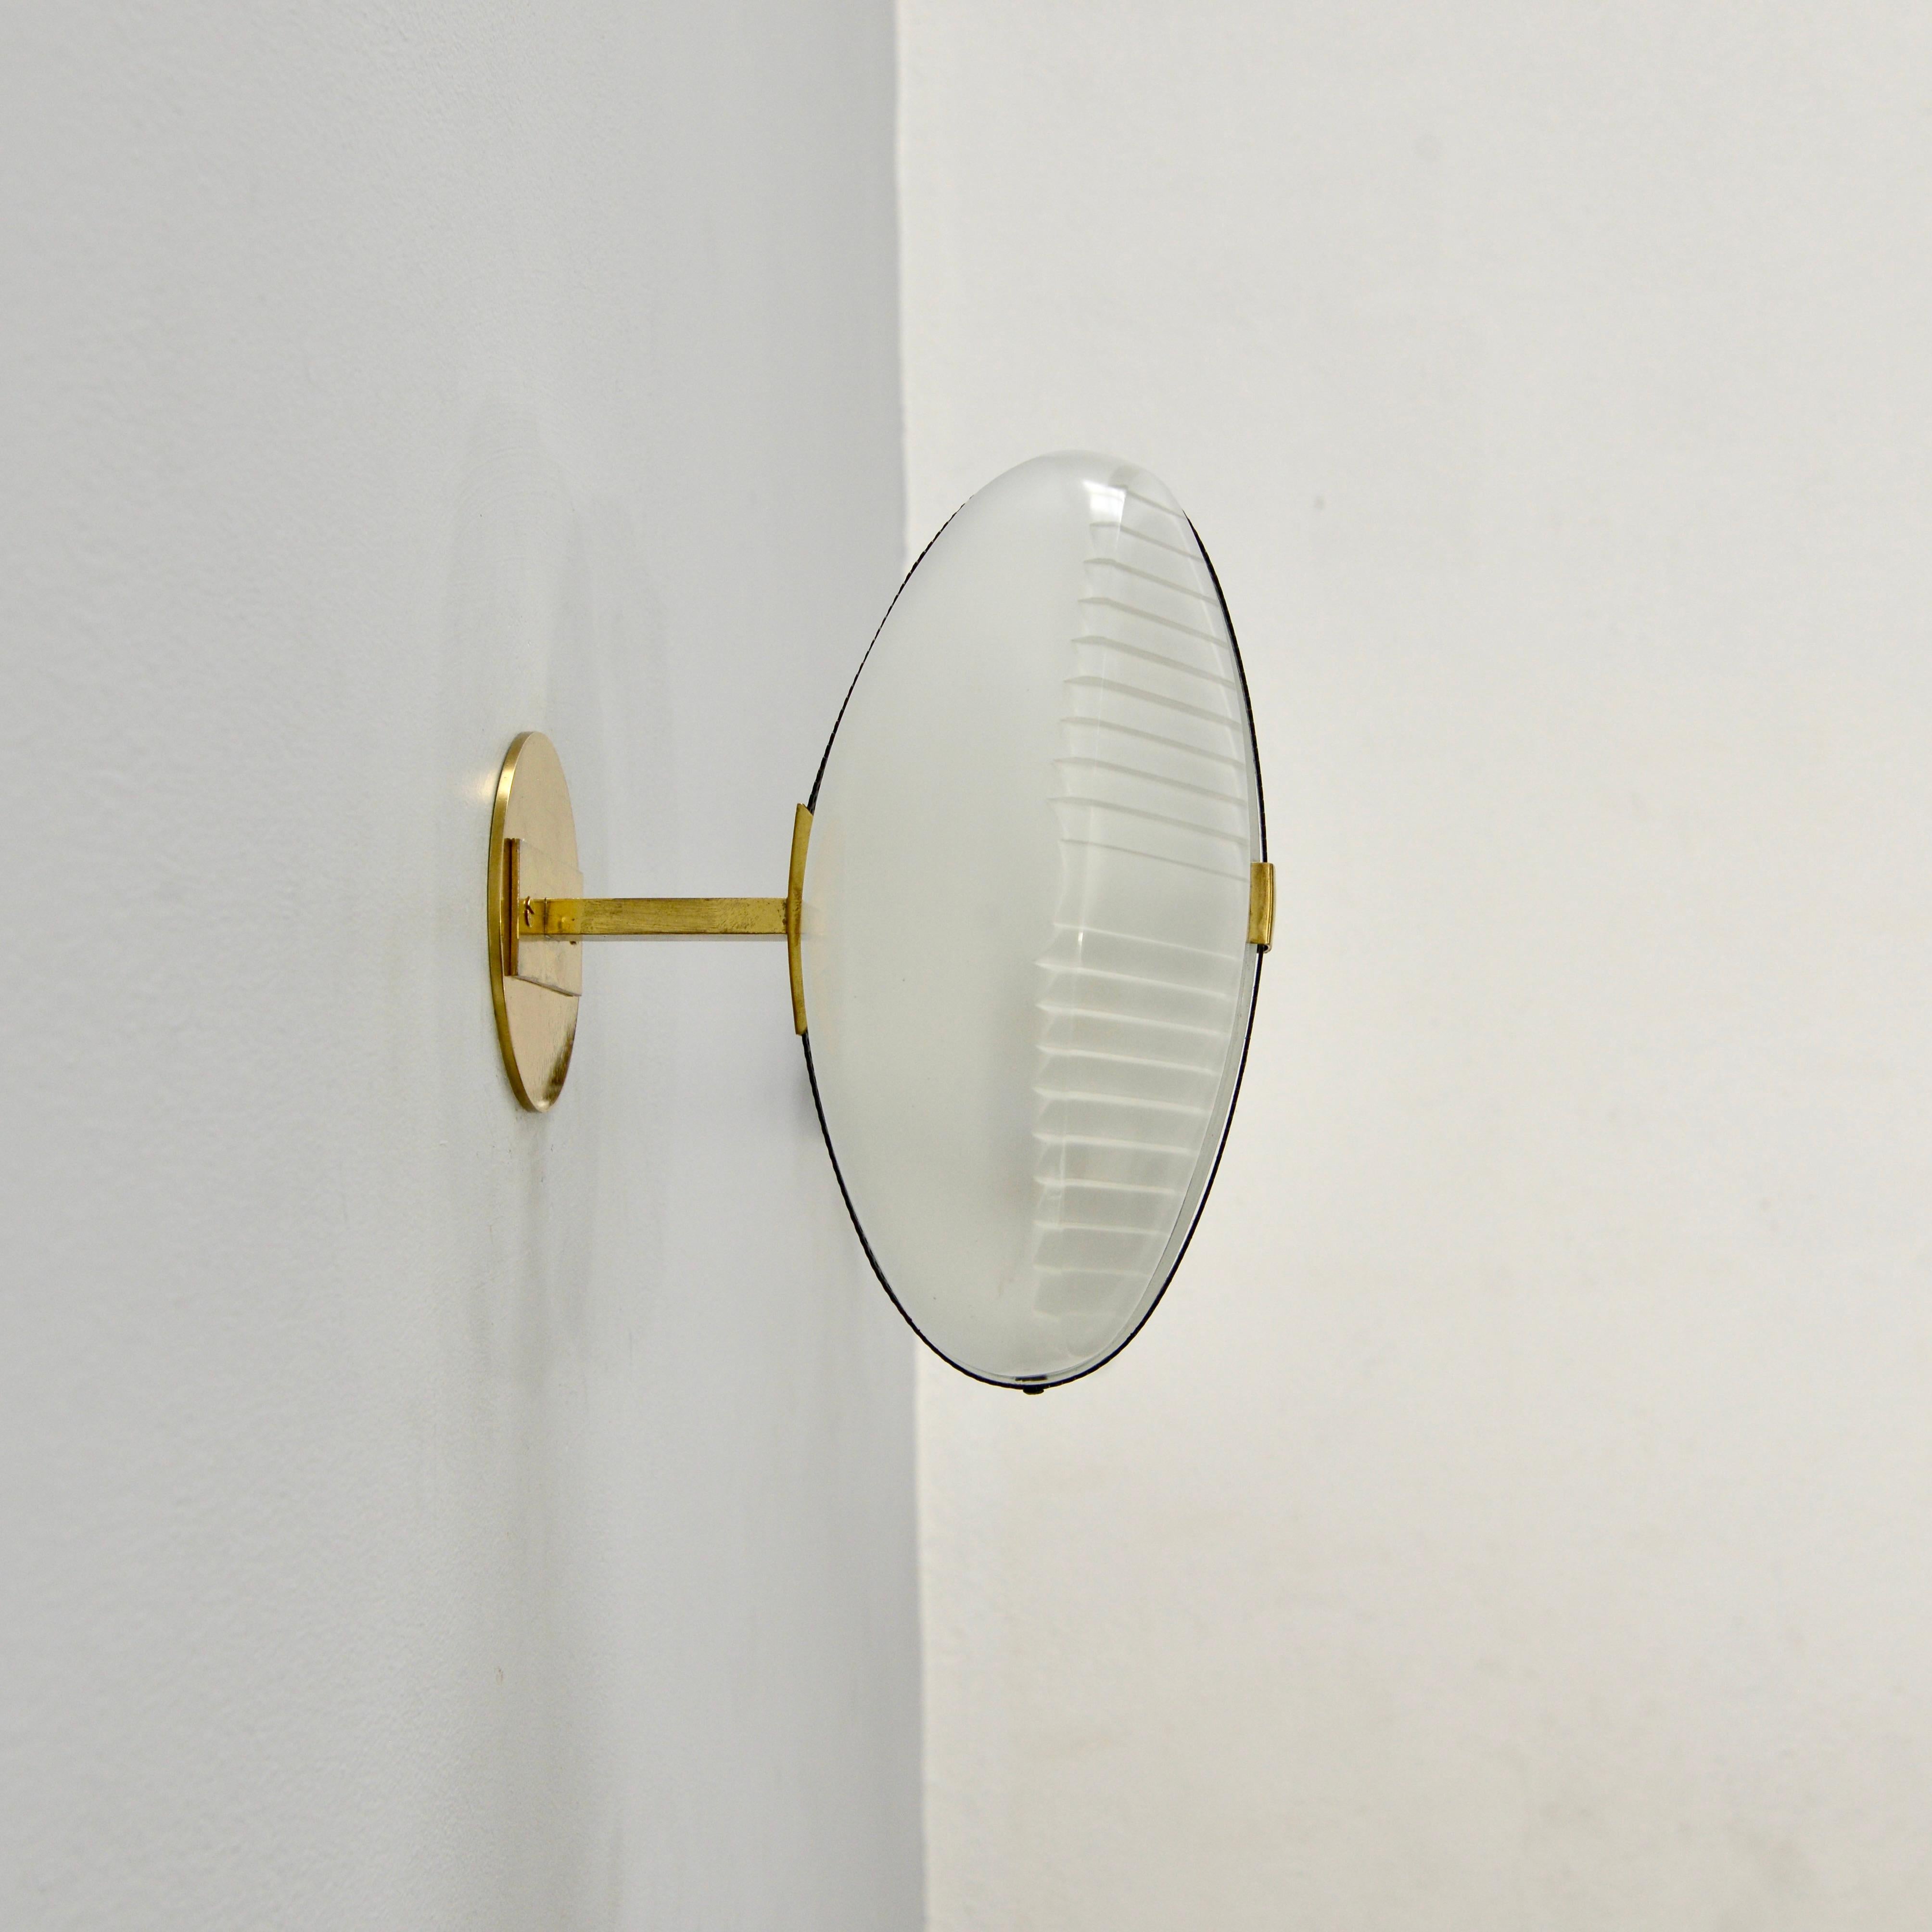 A single 1950s Italian glass, brass and steel sconce from Vico Magistretti. Wired with 2 E12 candelabra based sockets currently for use in the US. It can also be wired for use anywhere in the world. Lightbulb included with order.